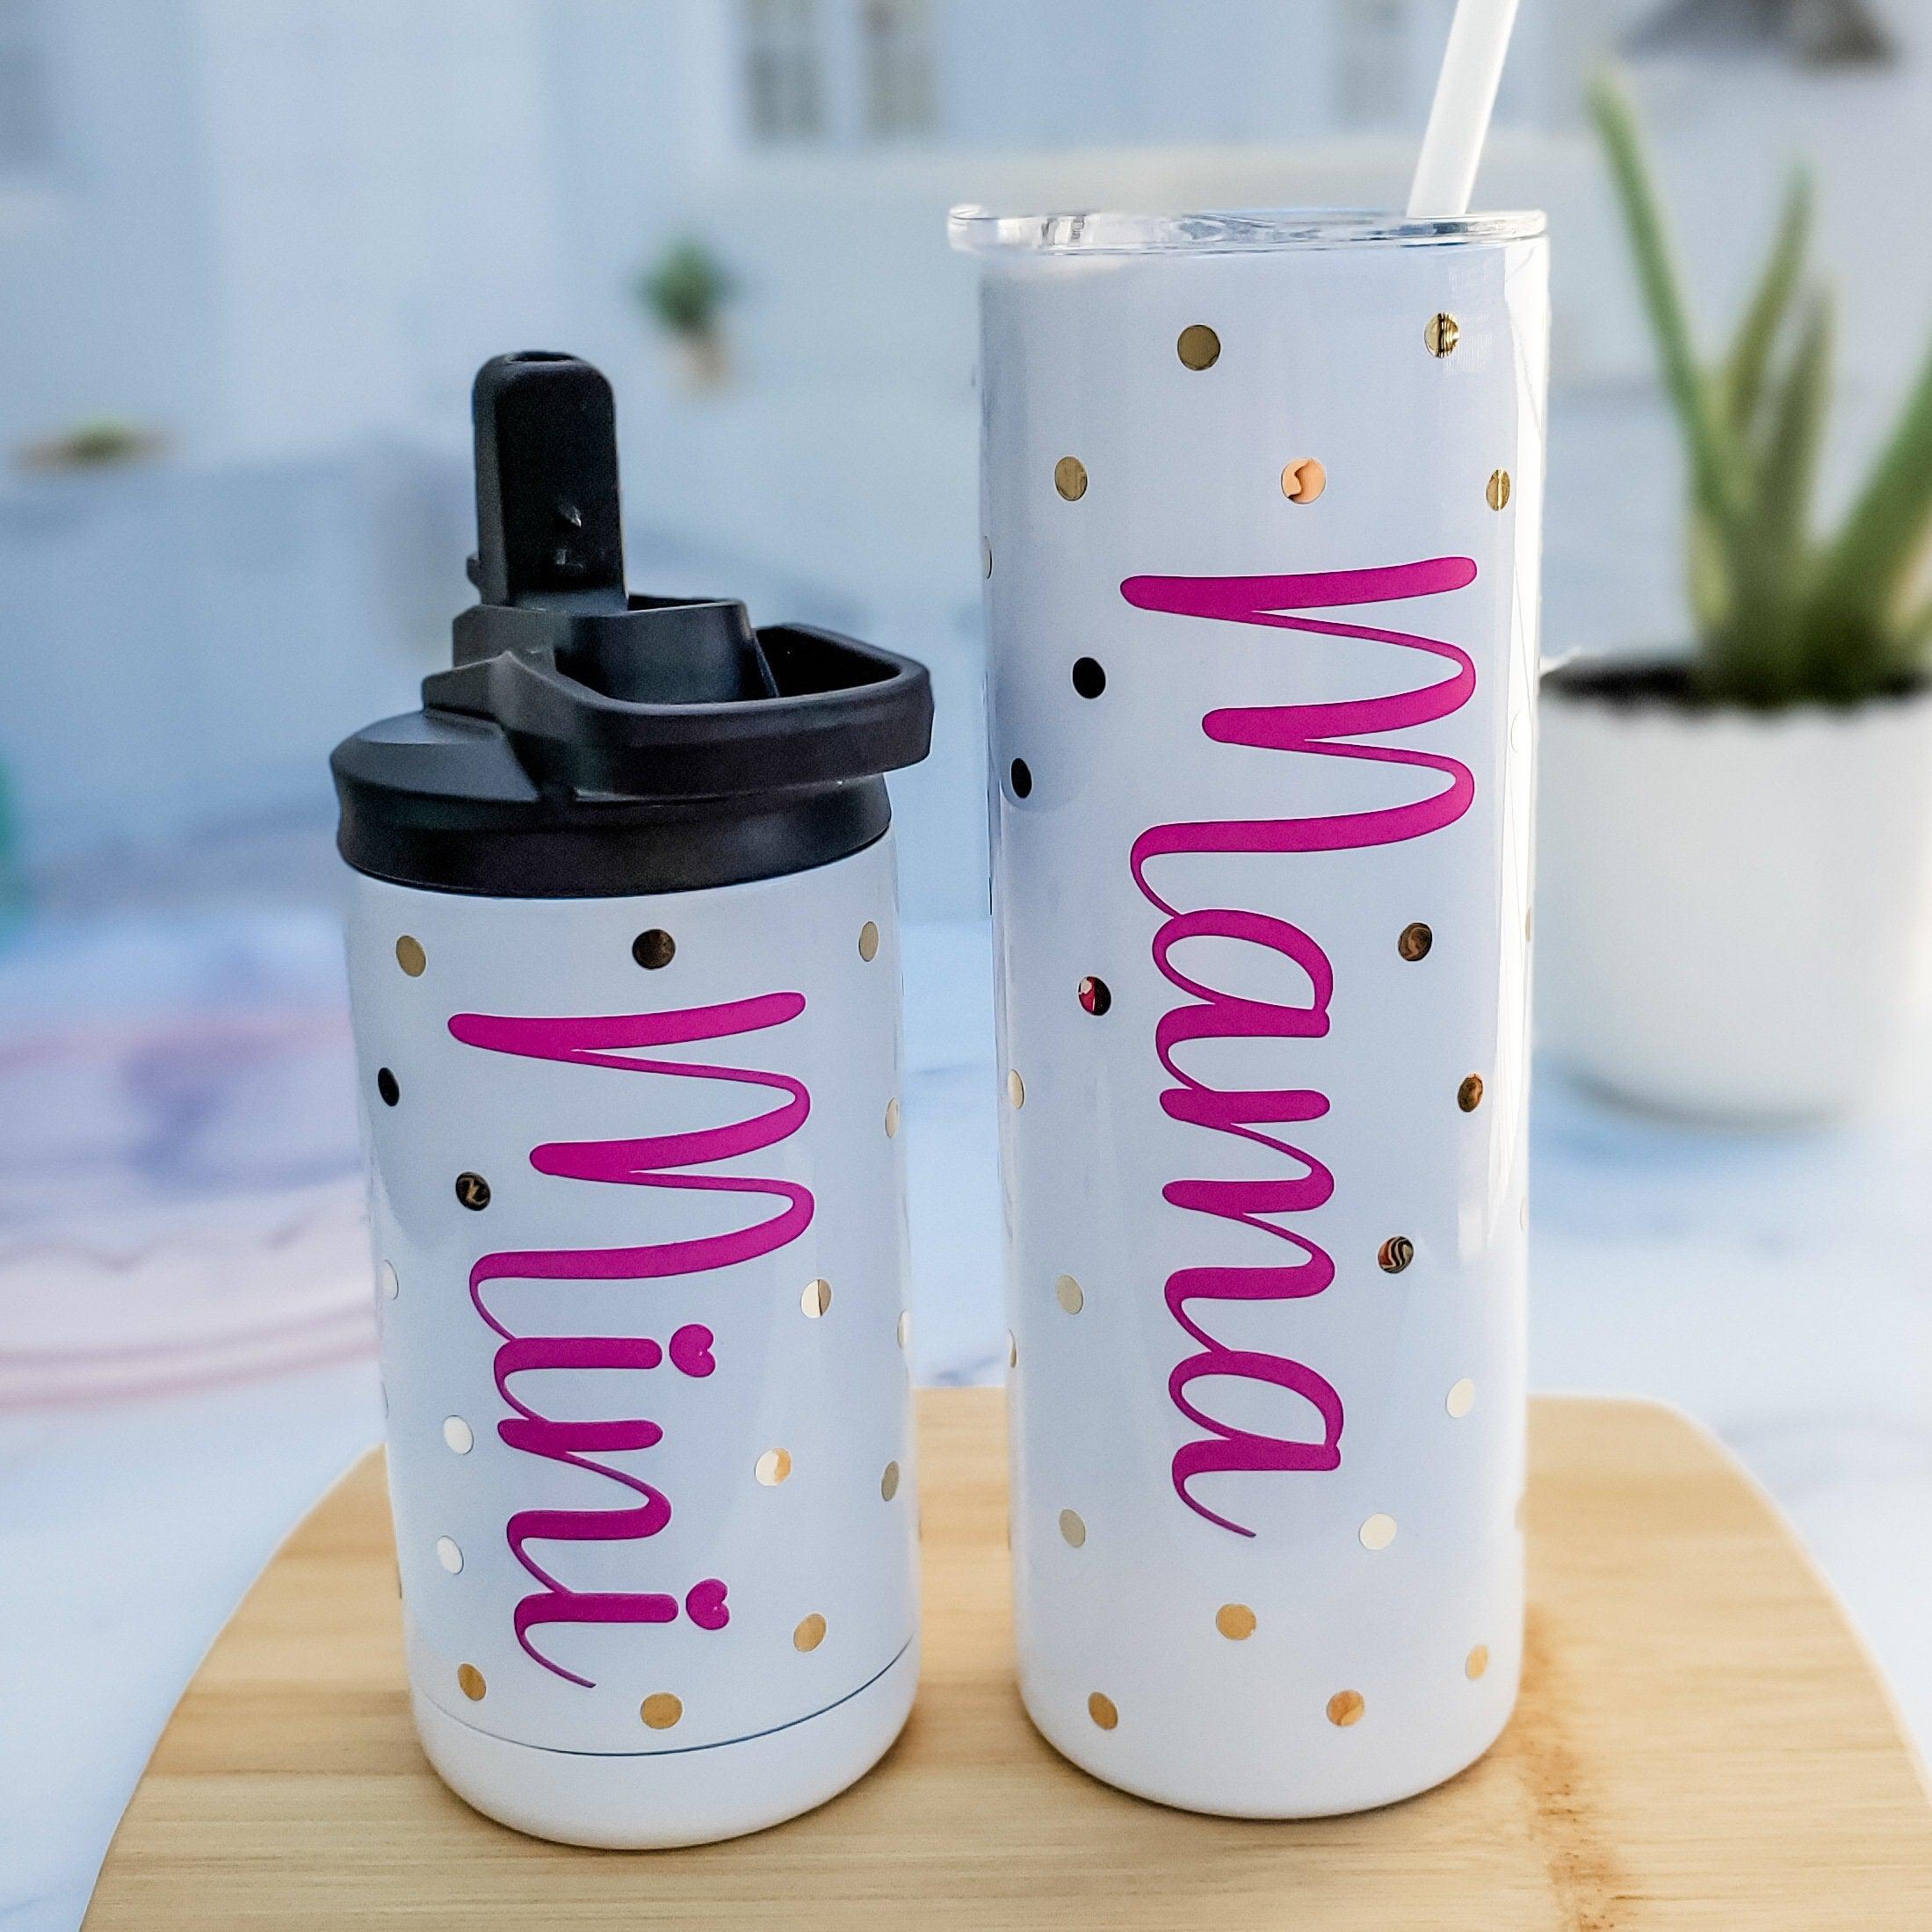 Mama and Mini Matching Tumbler Set - Color Changing Drink Tumblers for Baby Shower Gift - Mother's Day Gift for New Mom - Mommy and Me Cups